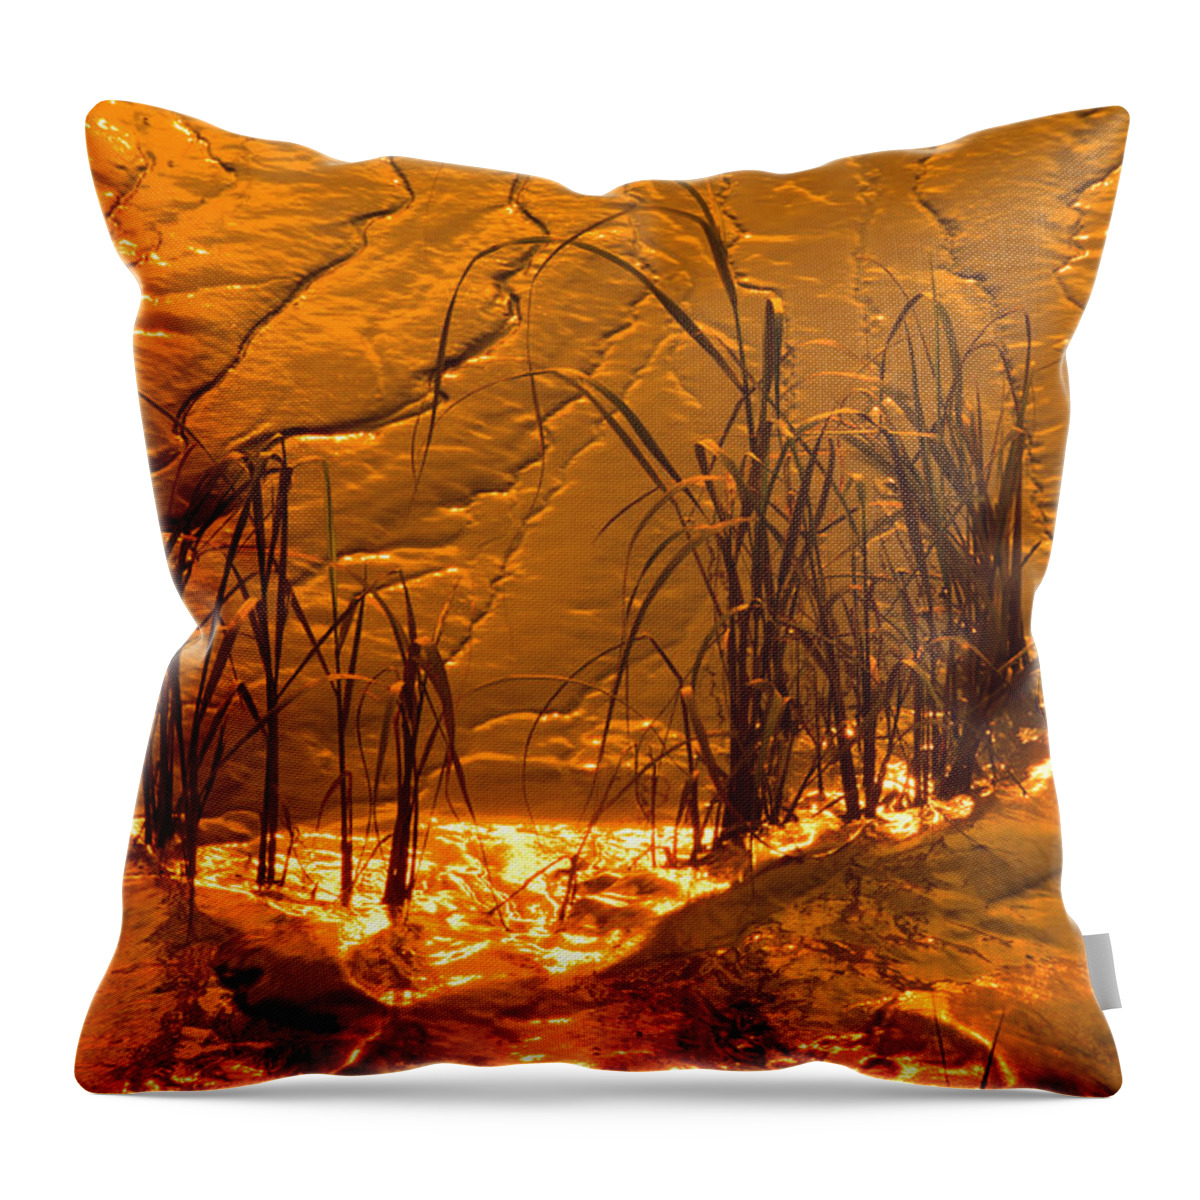 Abstract Throw Pillow featuring the photograph Tidal Mud Sundown by Irwin Barrett